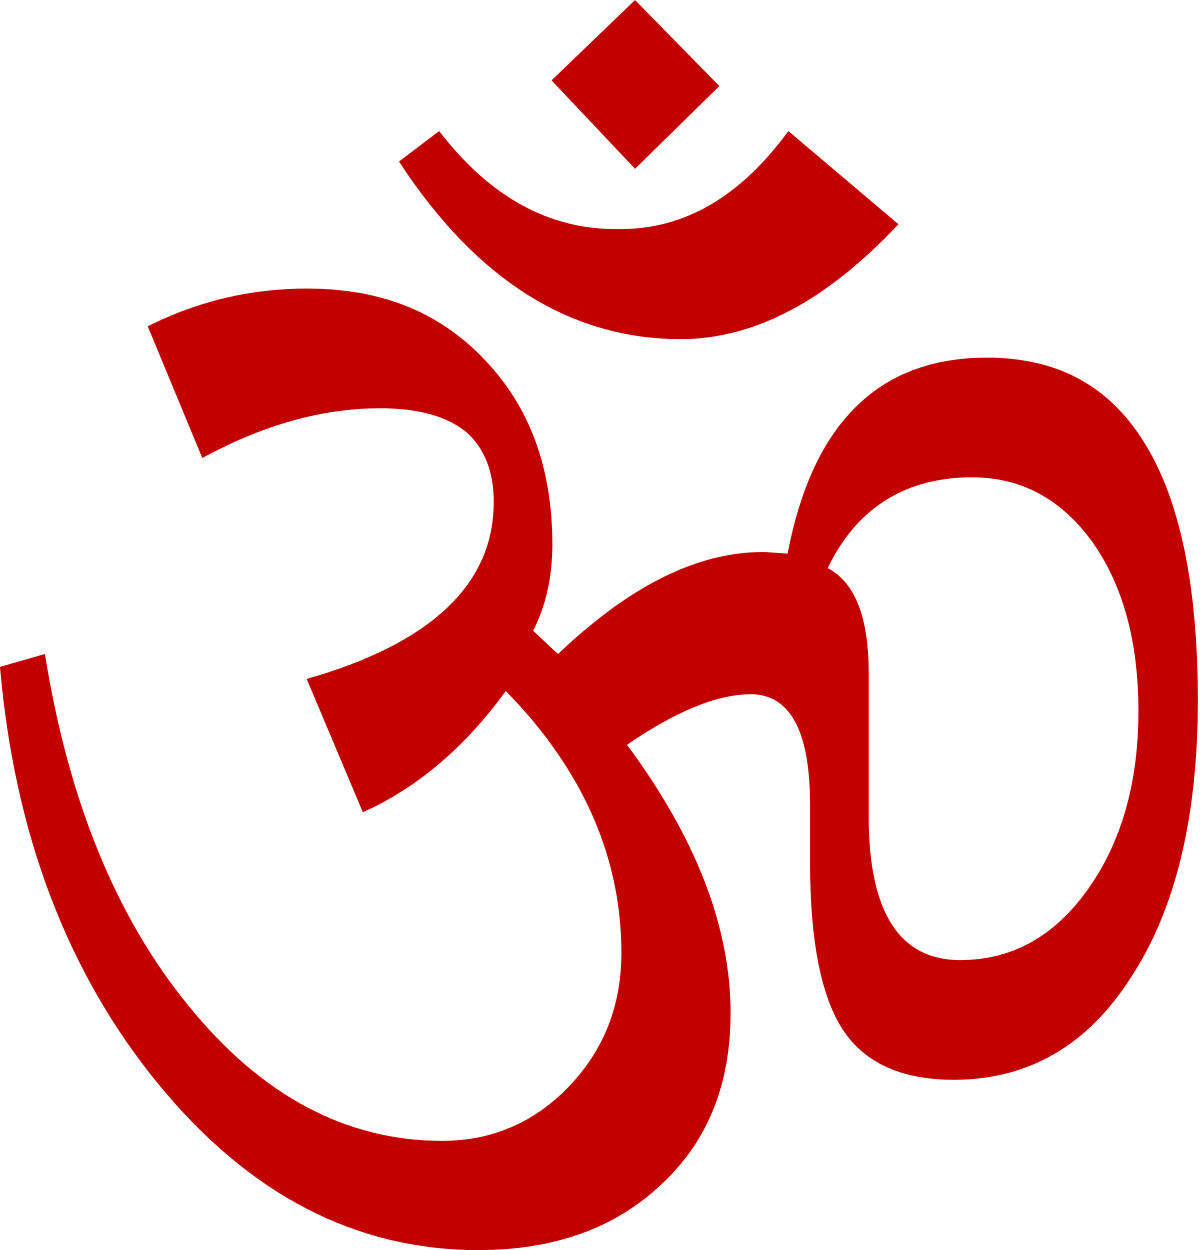 Hindu Religion Logo - List of converts to Hinduism